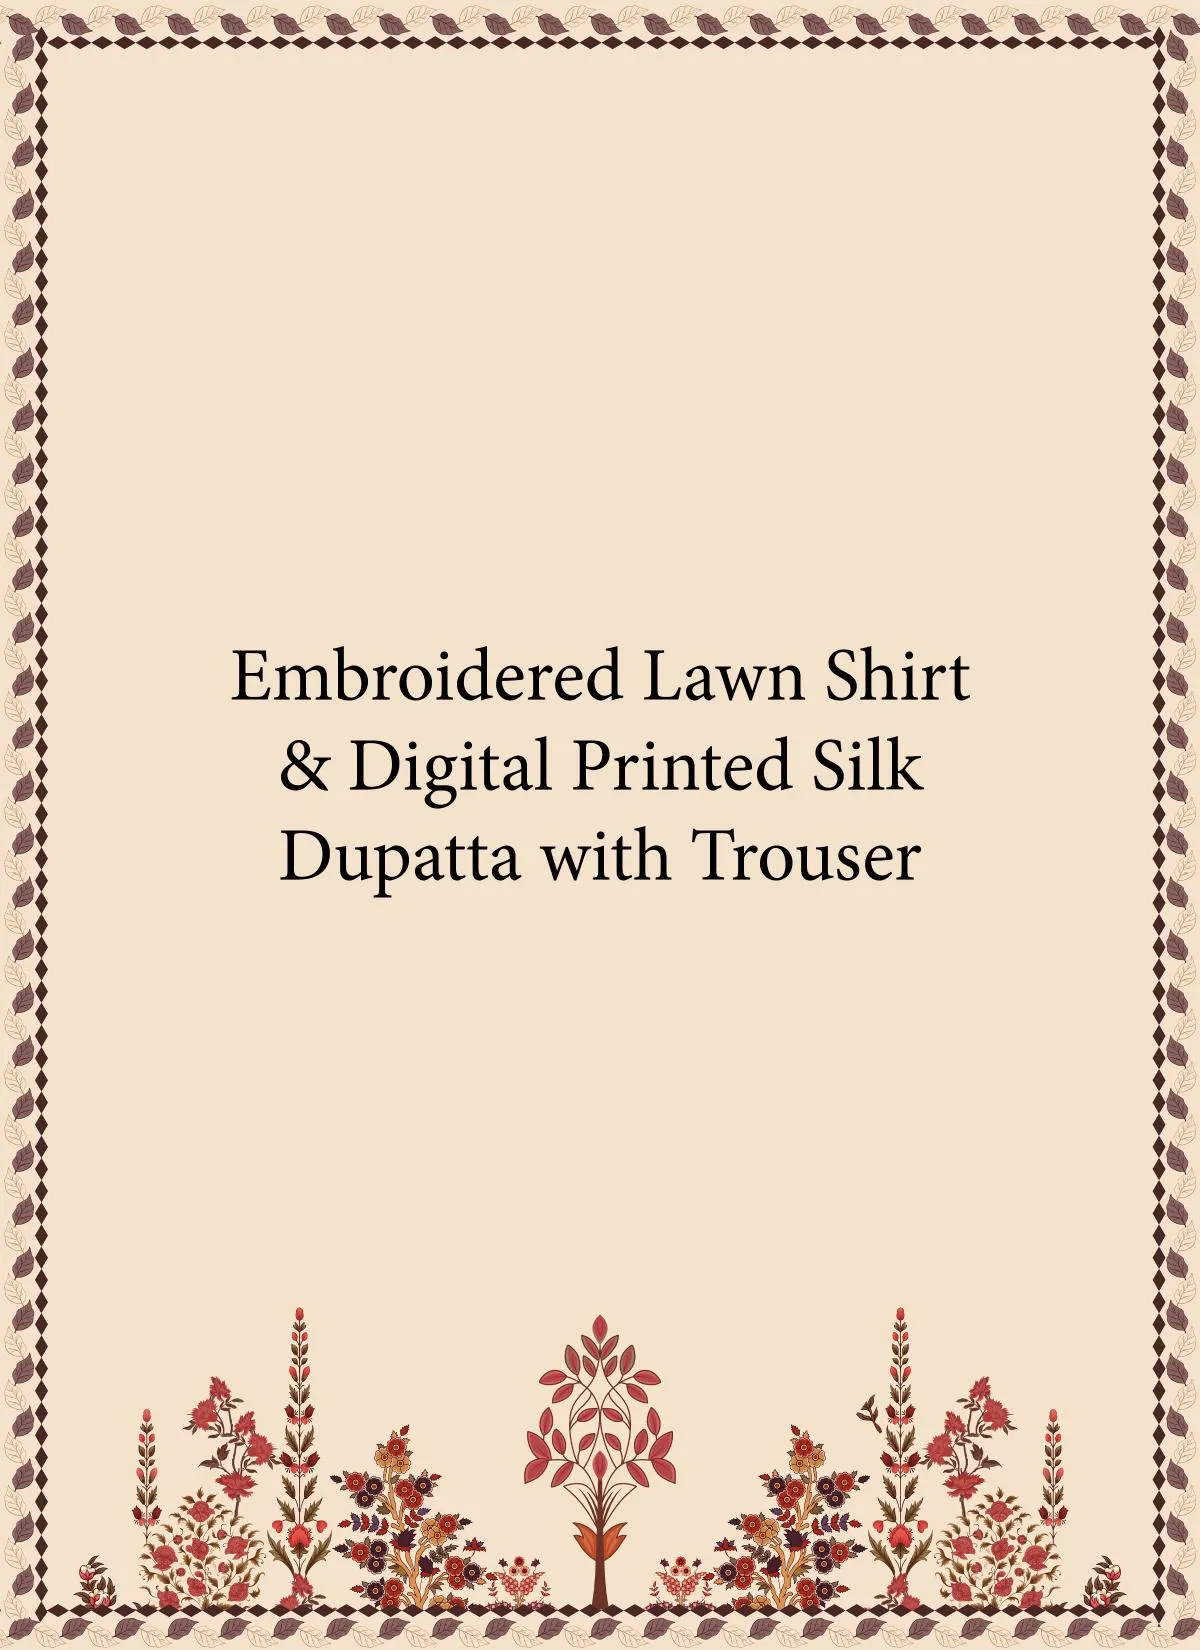 emproidered lawn shirt with silk duppata with trousers